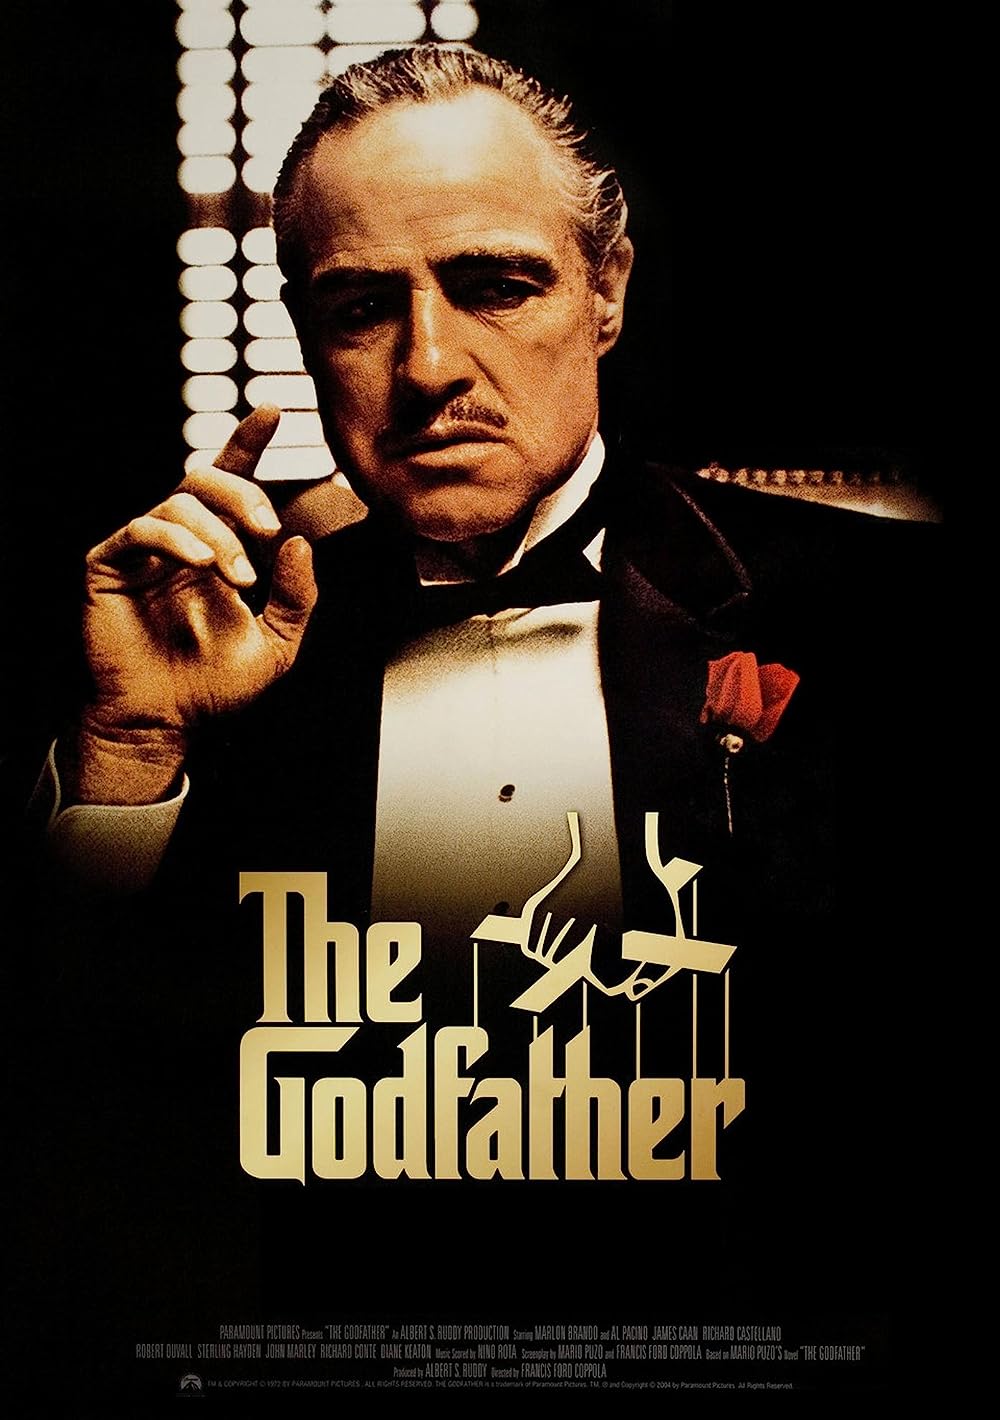 FULL MOVIE: The Godfather: Part 1 (1972)